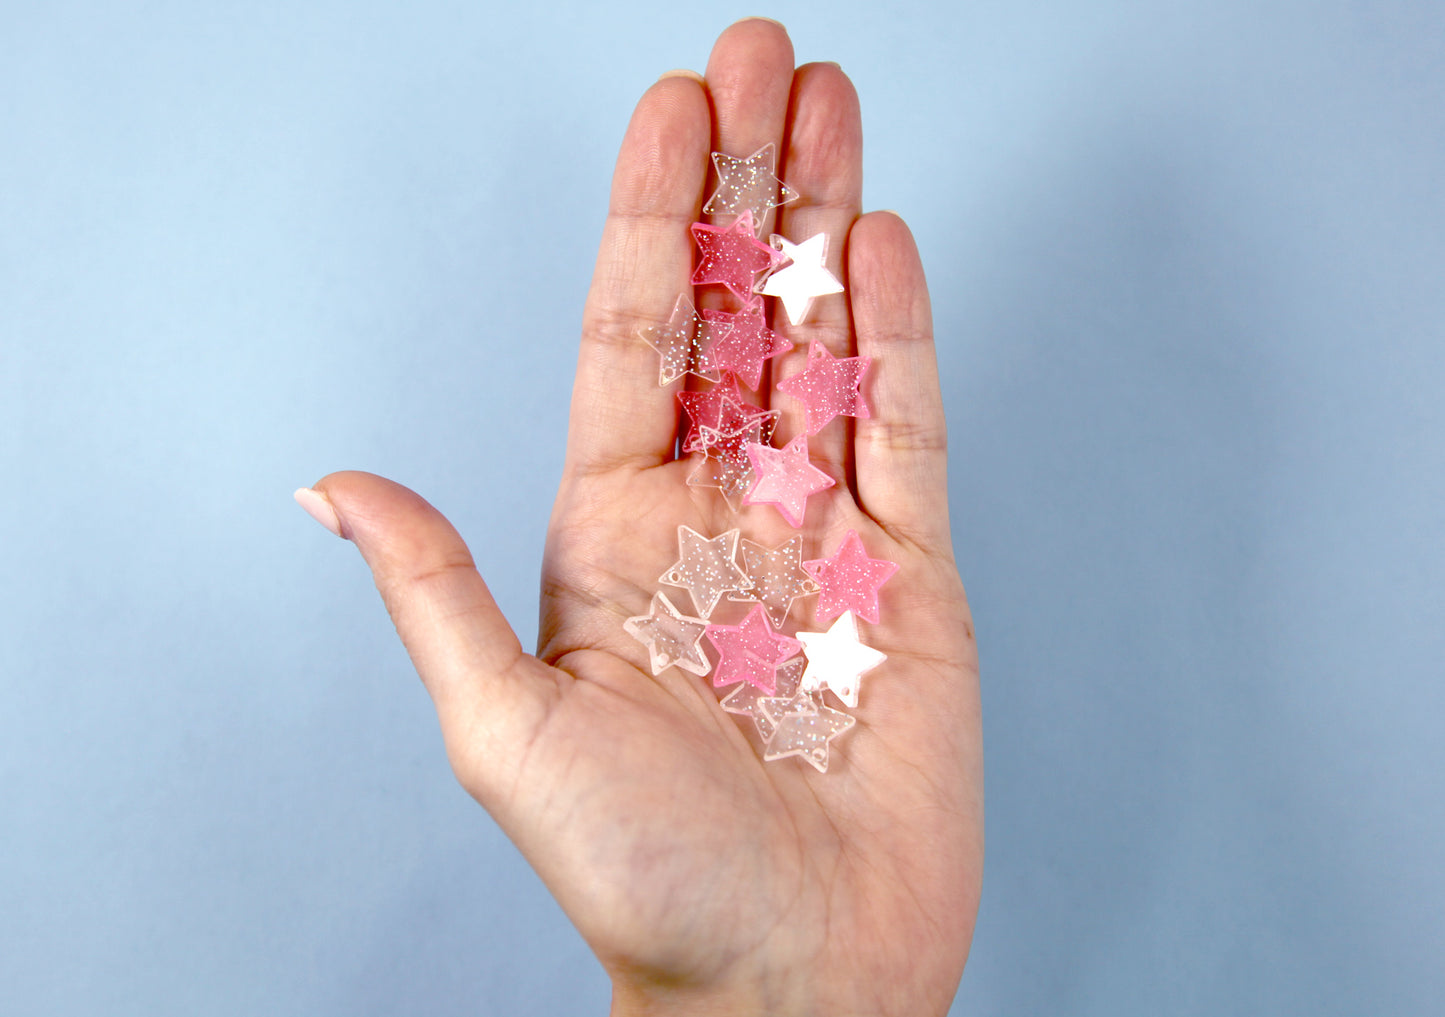 Mini Star Charms - 30mm Clear & Pink Glitter Translucent Star Resin Charms - 20 pc set